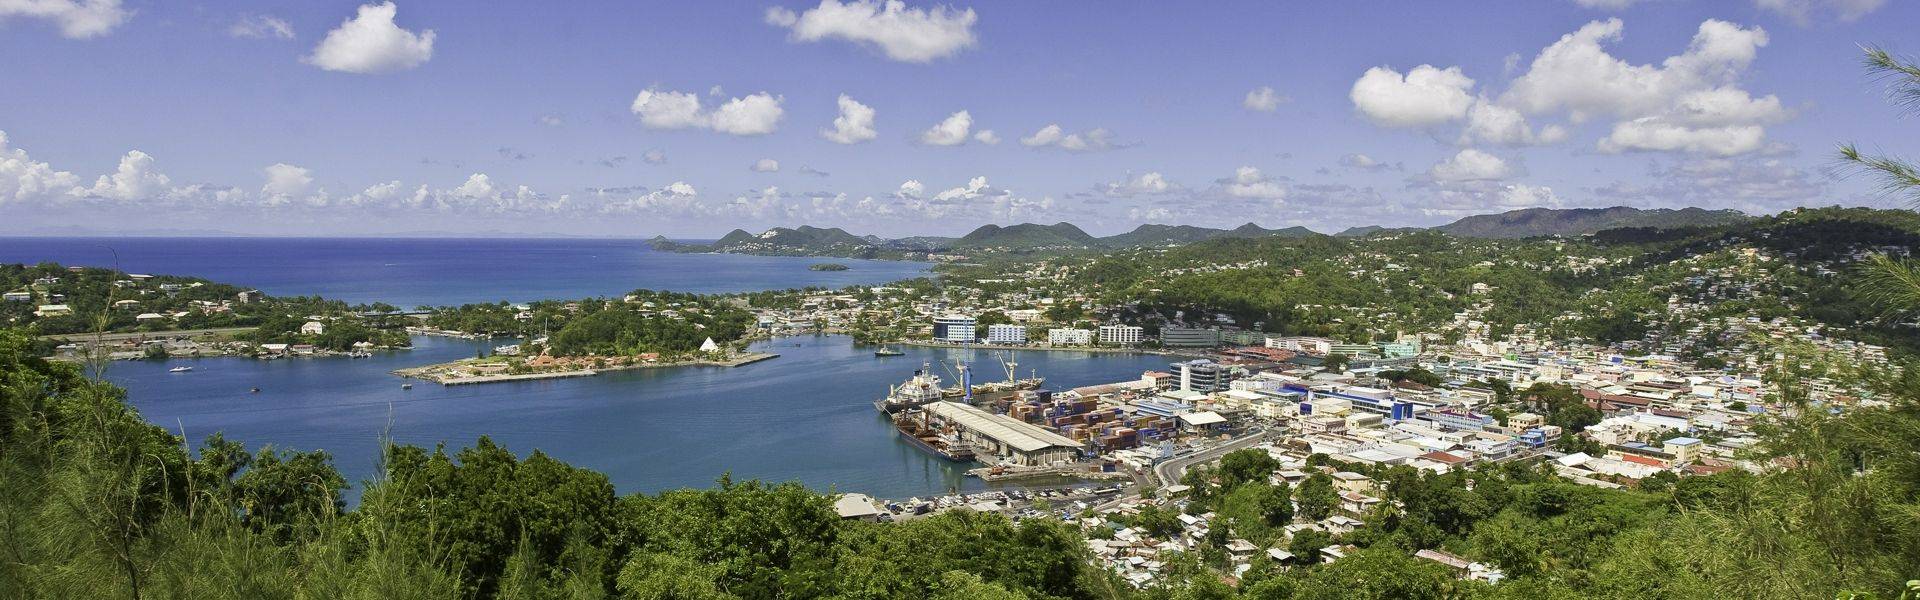 Castries from the Morne